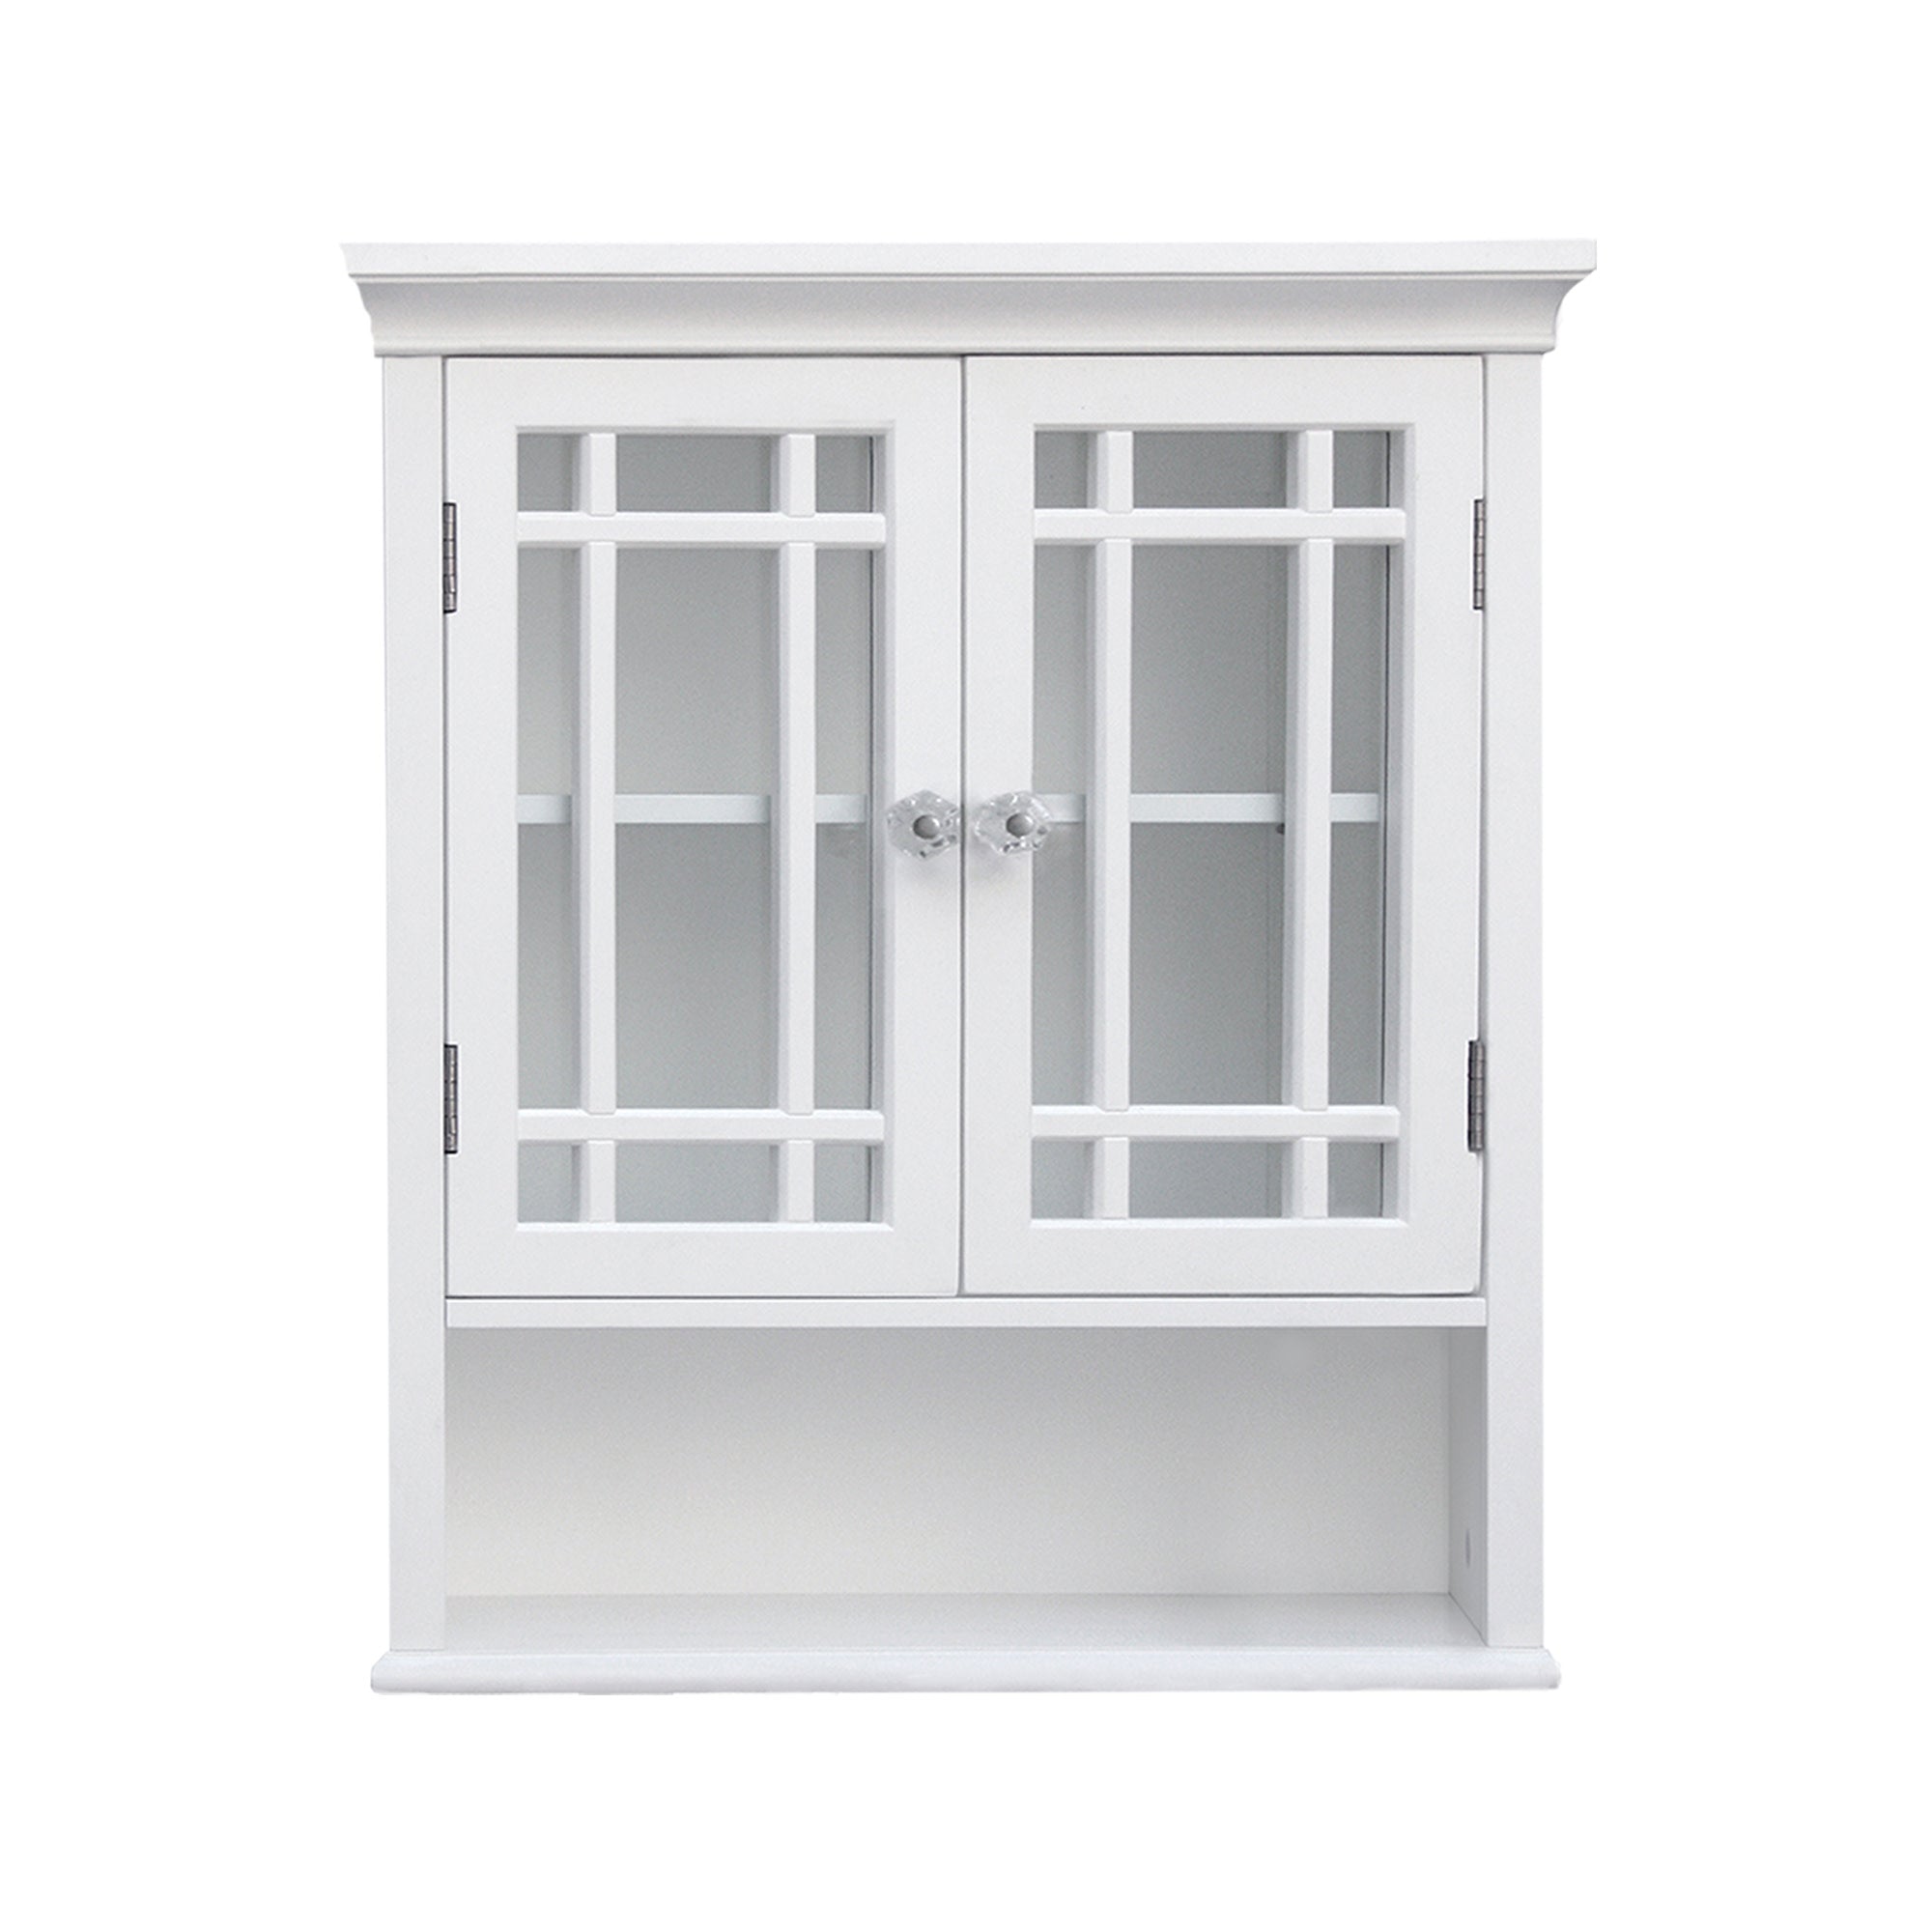 Elegant Home Fashions Neal Removable Wooden Wall Cabinet with 2 Glass Doors- White